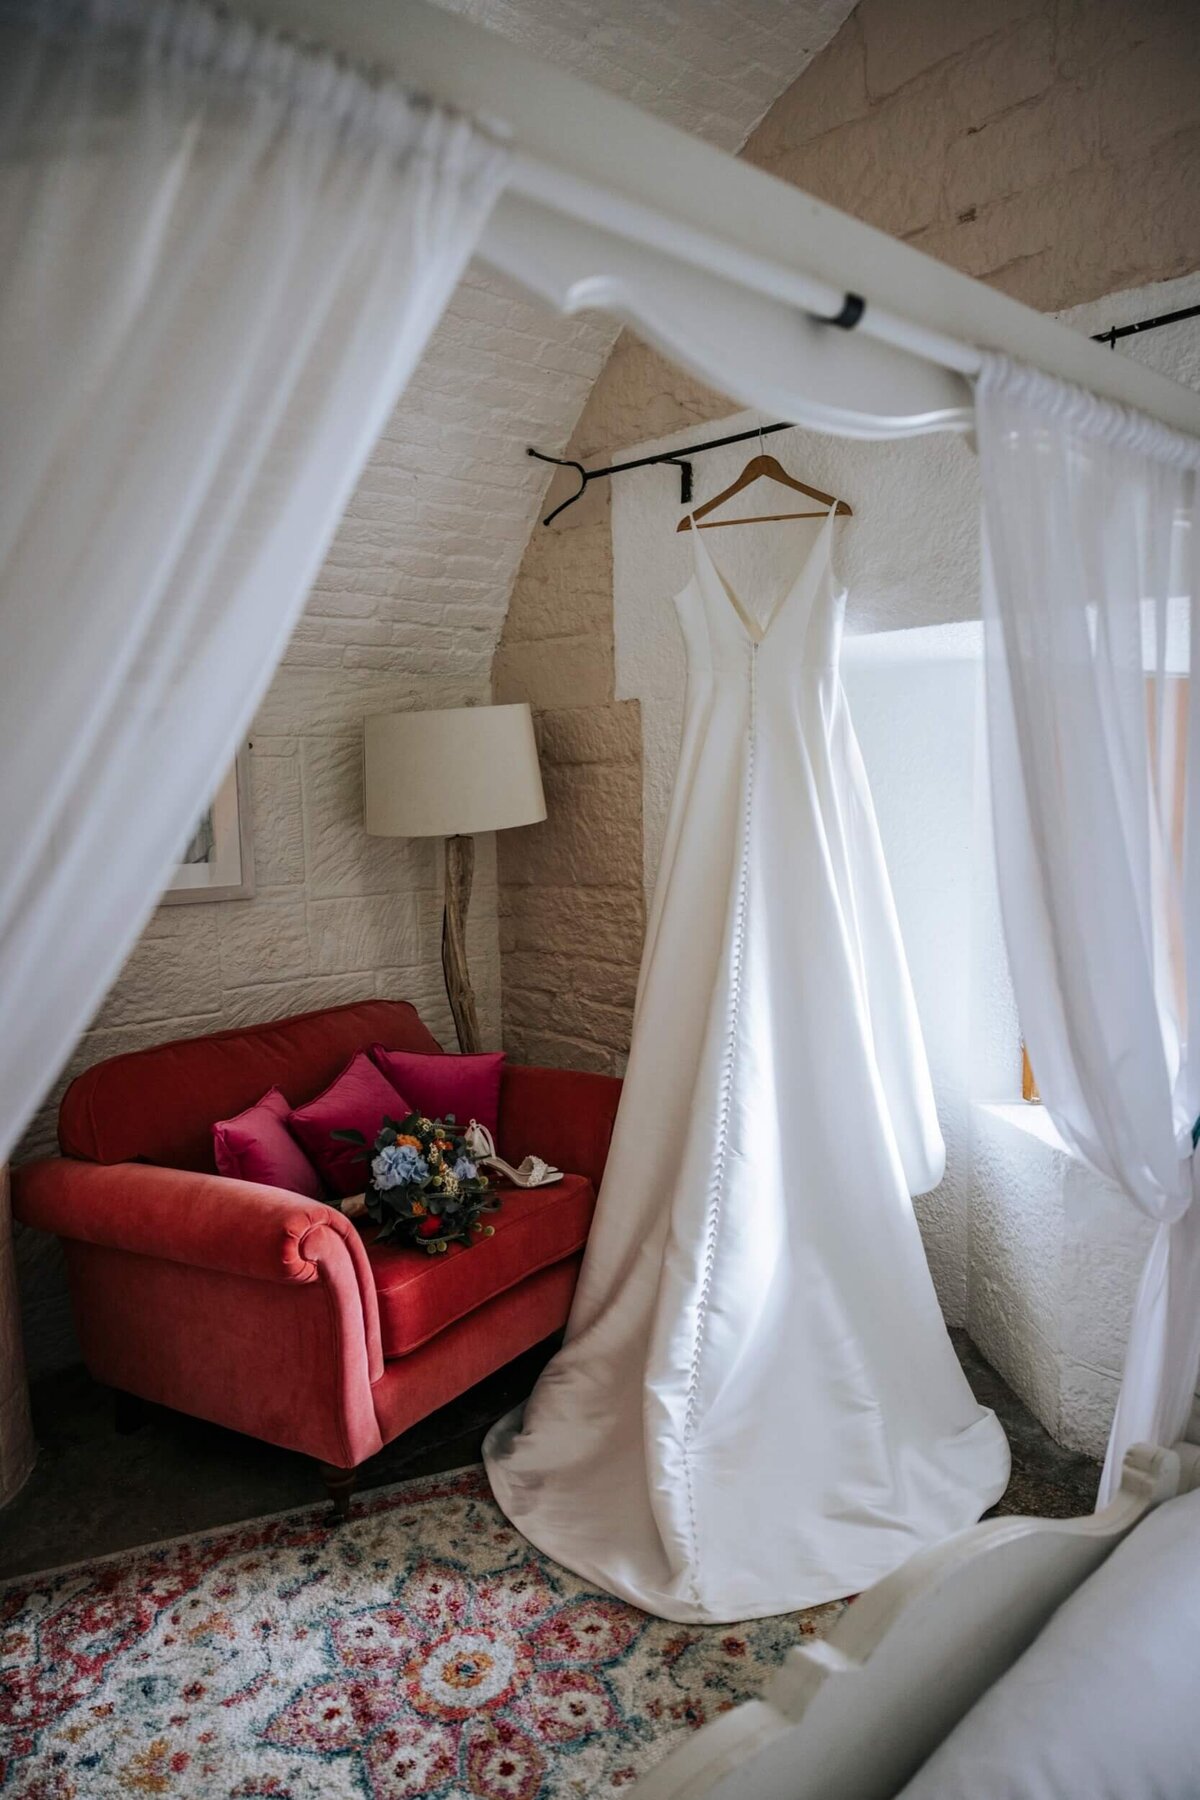 A bed room with a red chair and a canopy with a wedding dress hanging in front of the window